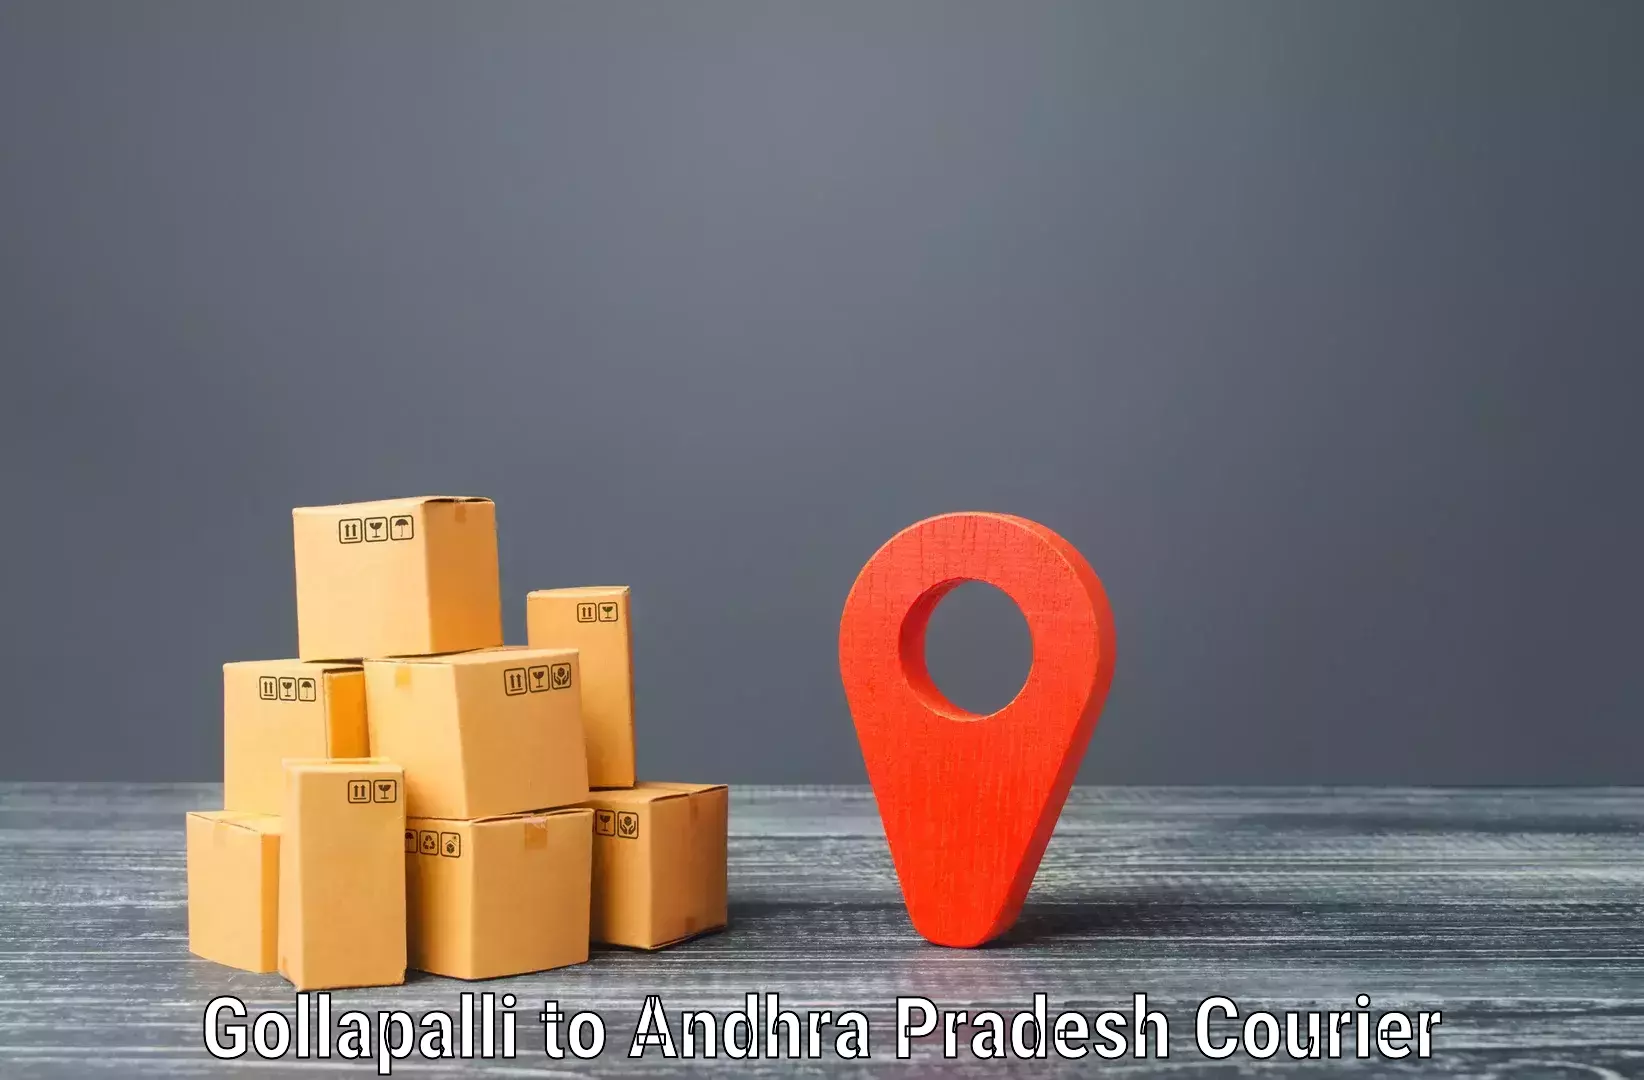 Online package tracking Gollapalli to Buckinghampet